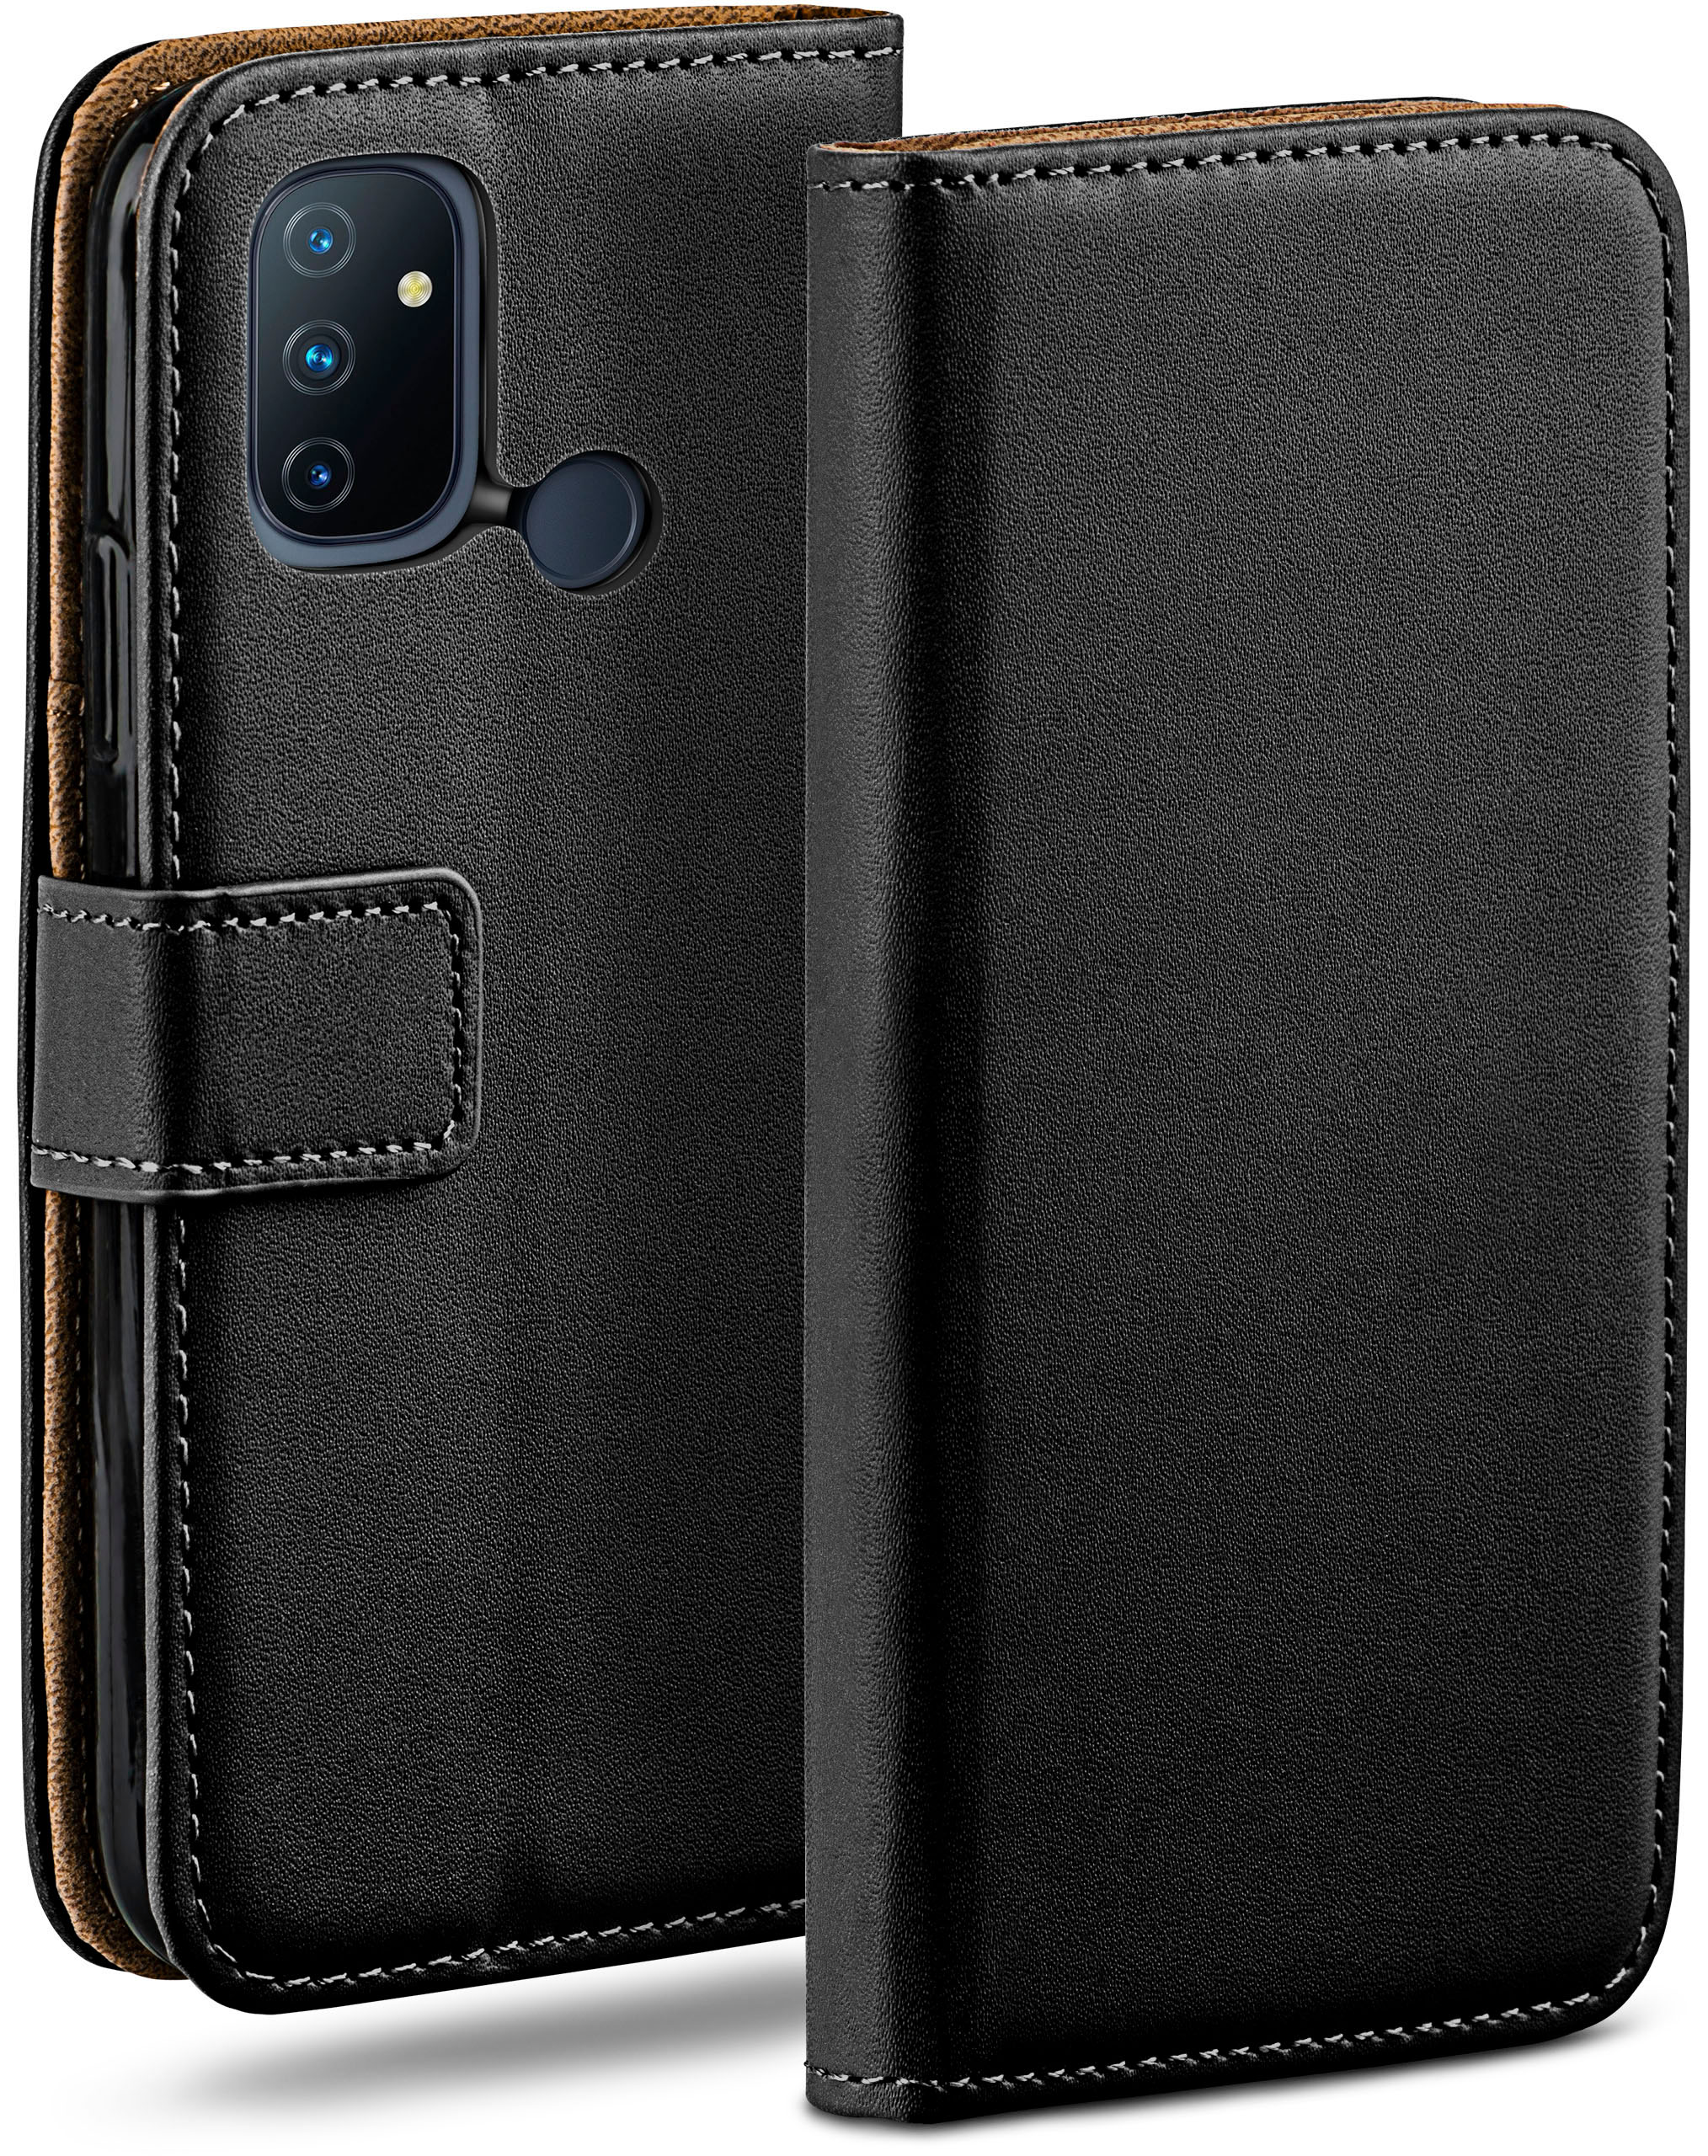 Case, Nord OnePlus, MOEX Bookcover, Deep-Black N100, Book